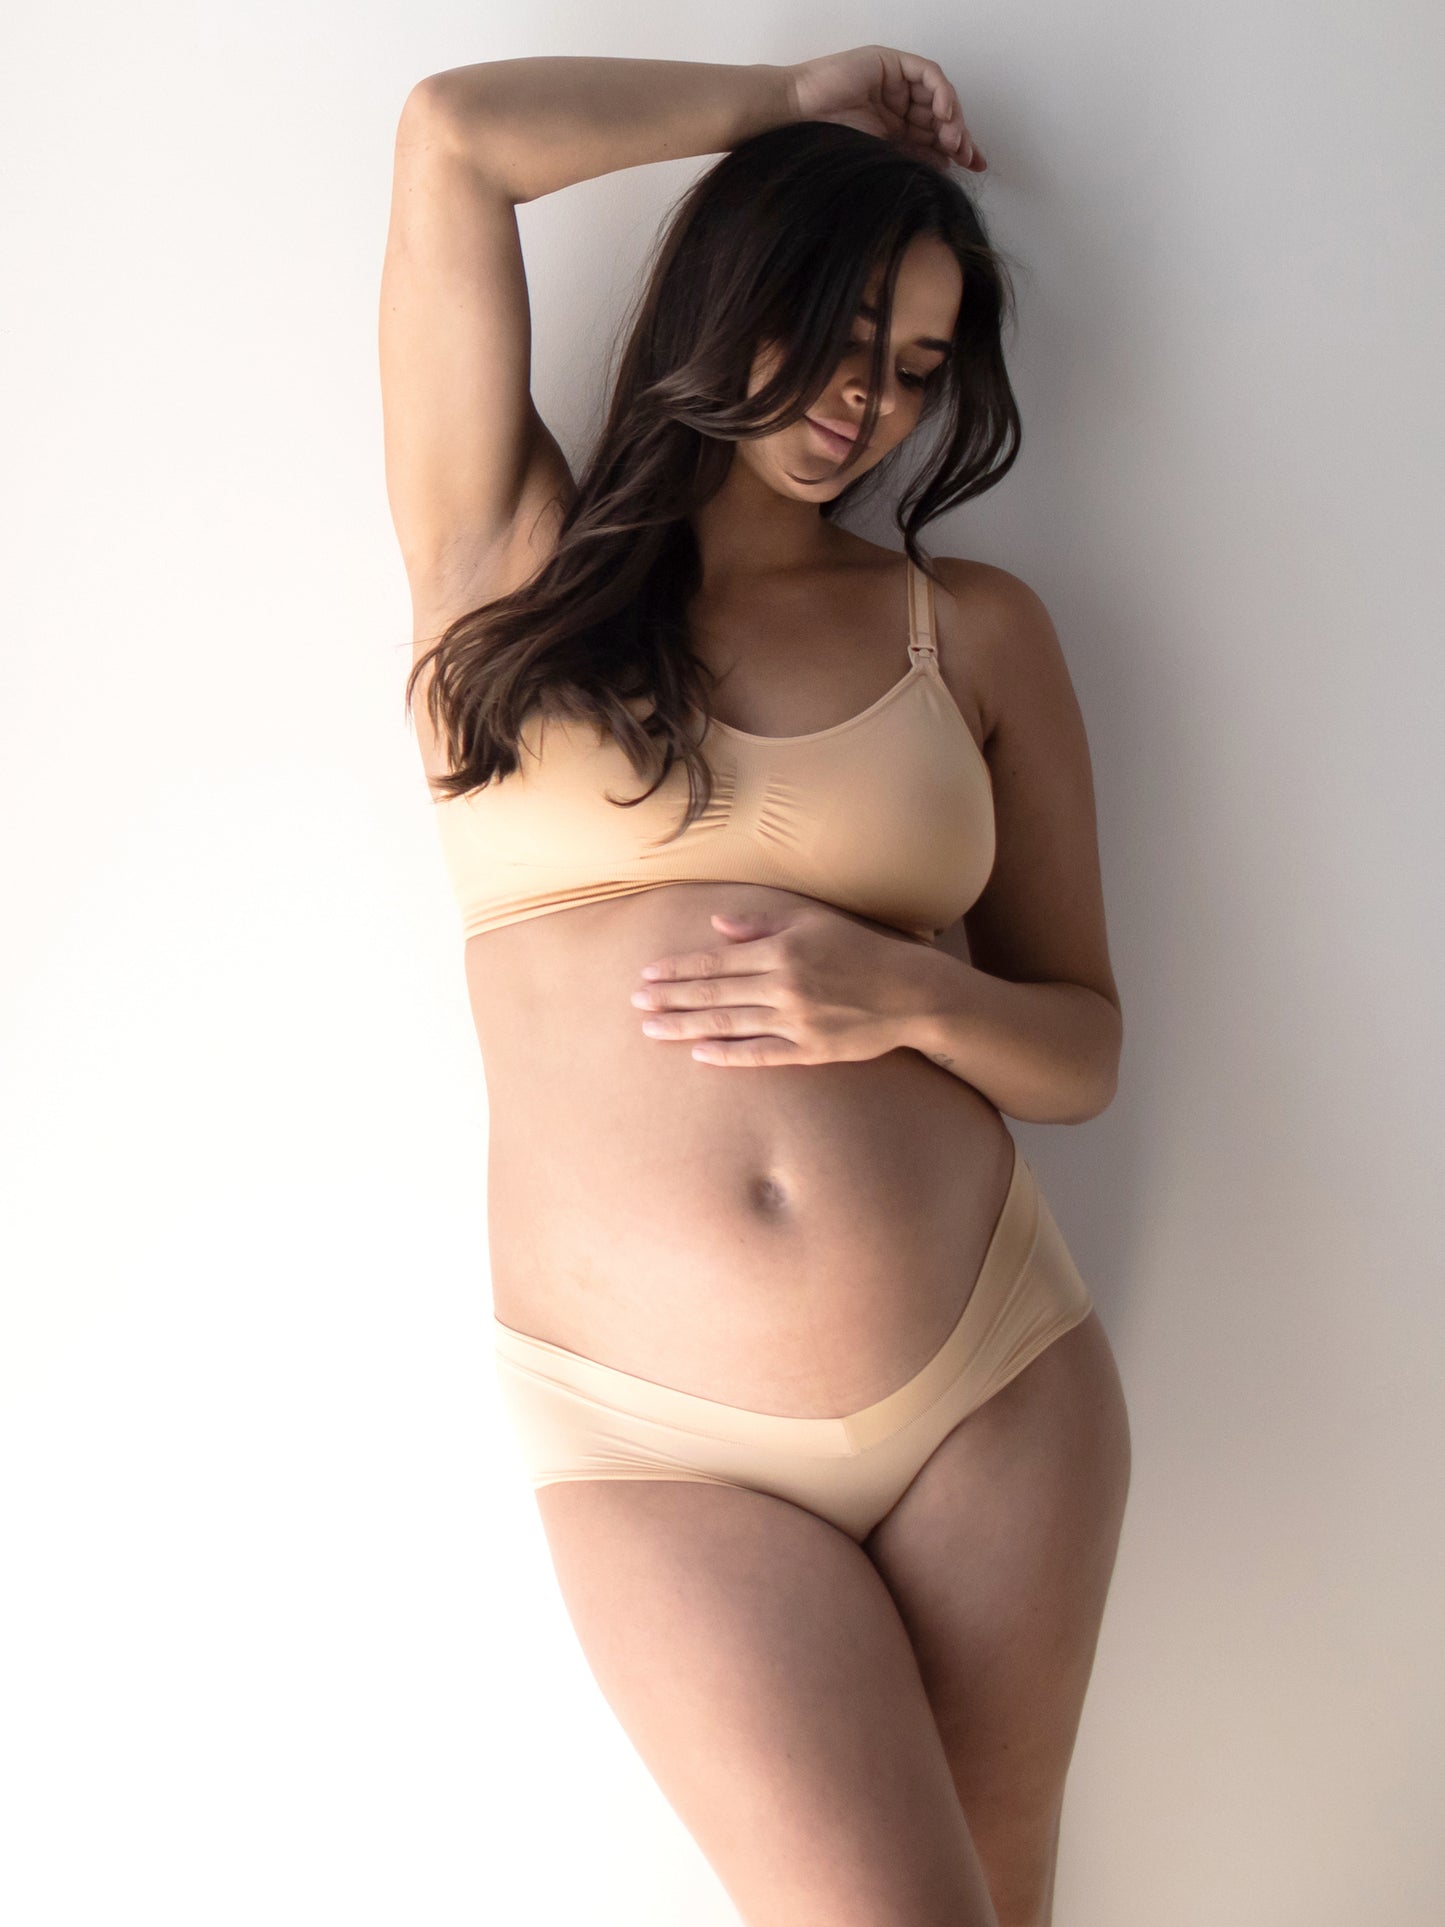 Kindred Bravely - Postpartum granny pantieswho enjoys those?! I have the  PERFECT alternative for you, mamas! The Postpartum & C-Section Recovery  Panty {beautiful} . {soft} . {high waisted} . {comfortable} Grab a